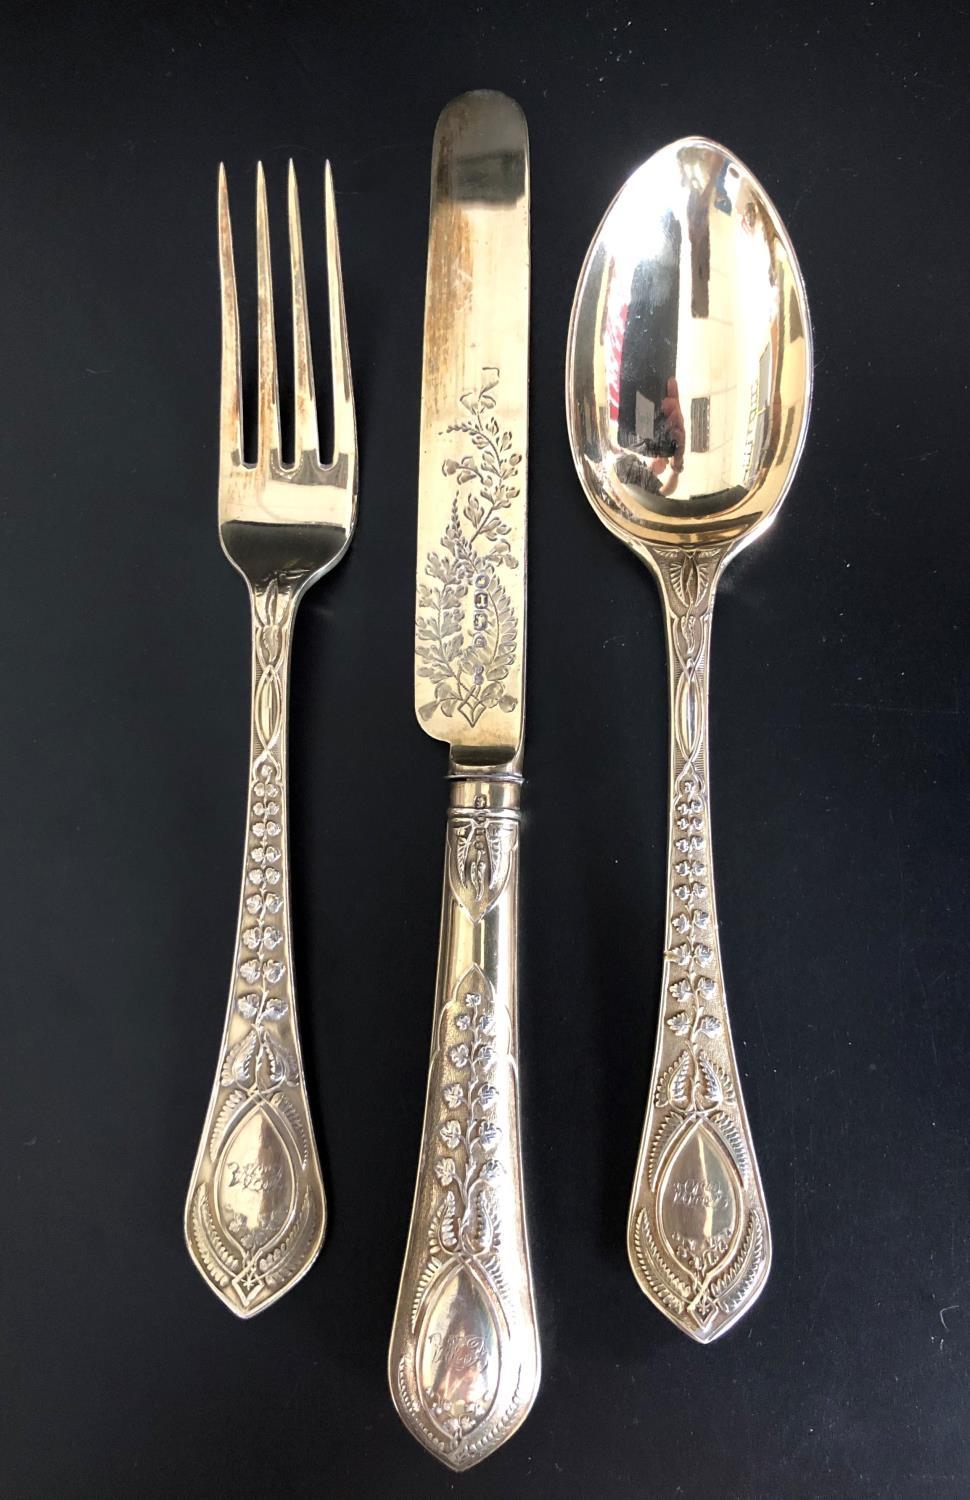 HIGHLY DECORATIVE VICTORIAN SILVER GILT KNIFE, FORK AND SPOON, all with raised foliate decoration to